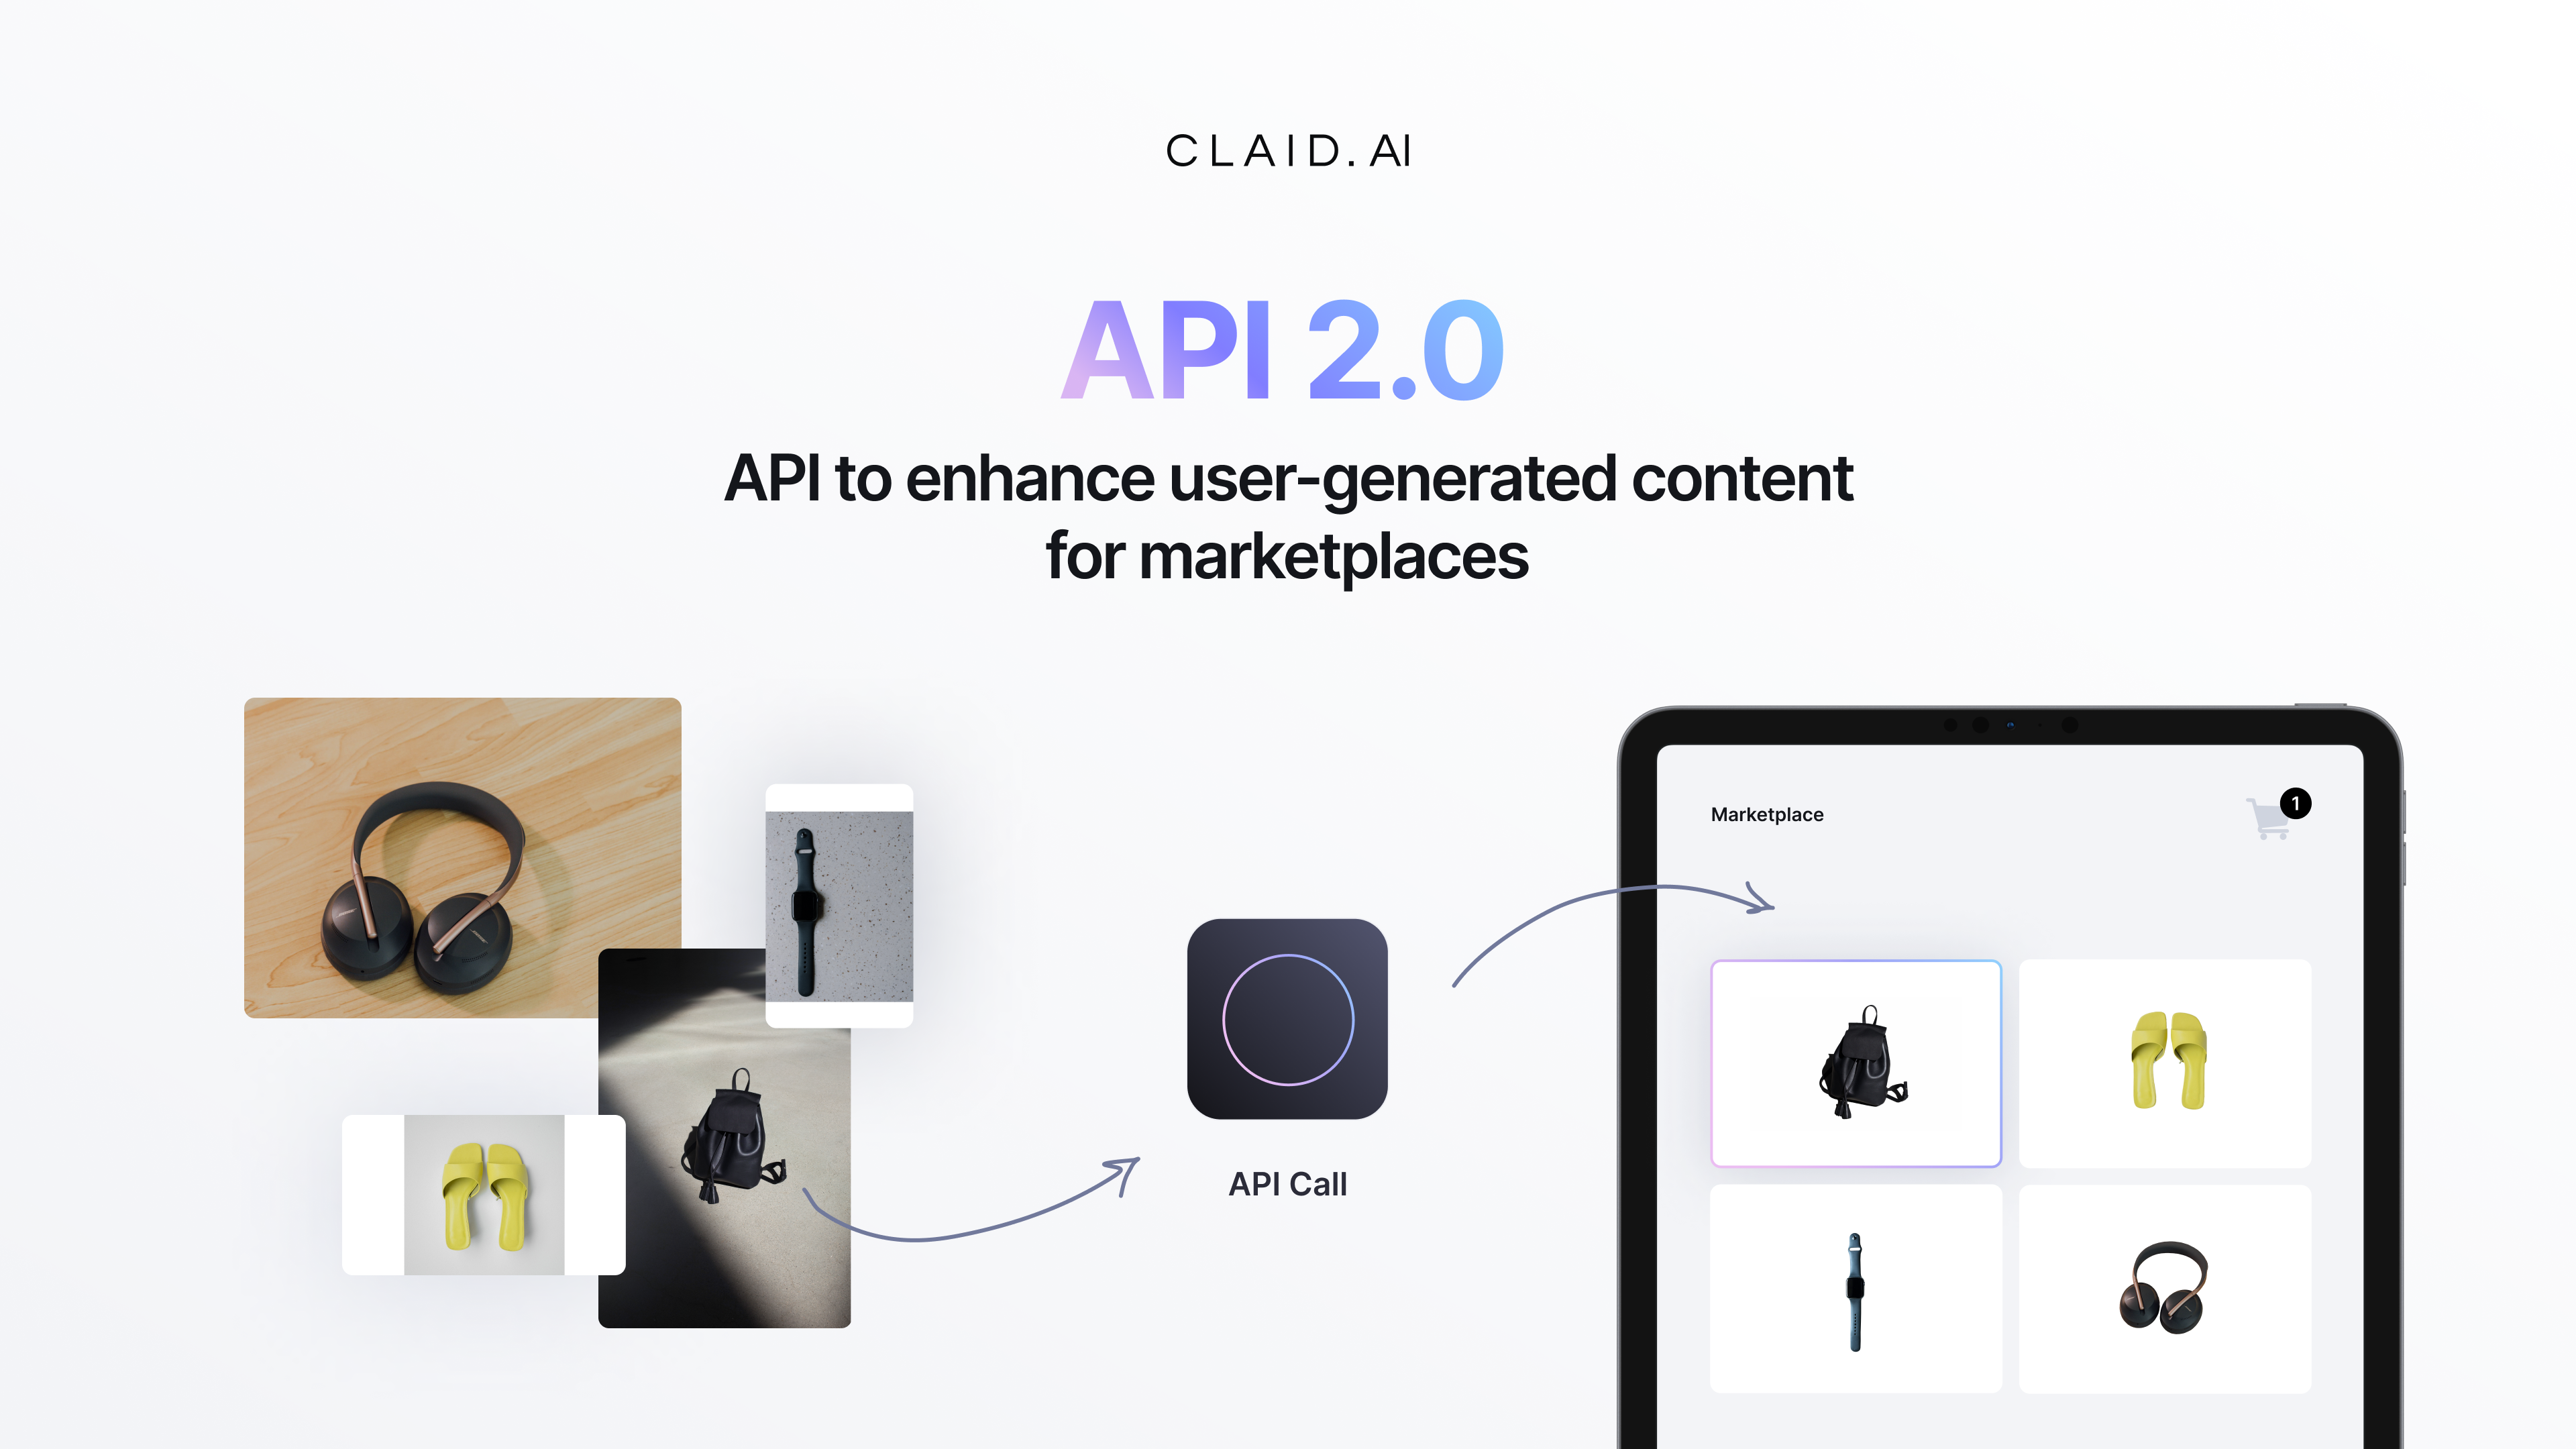 Online marketplaces rely on user-generated content but have limited control over its quality. Claid's new API allows multi-vendor platforms to automat